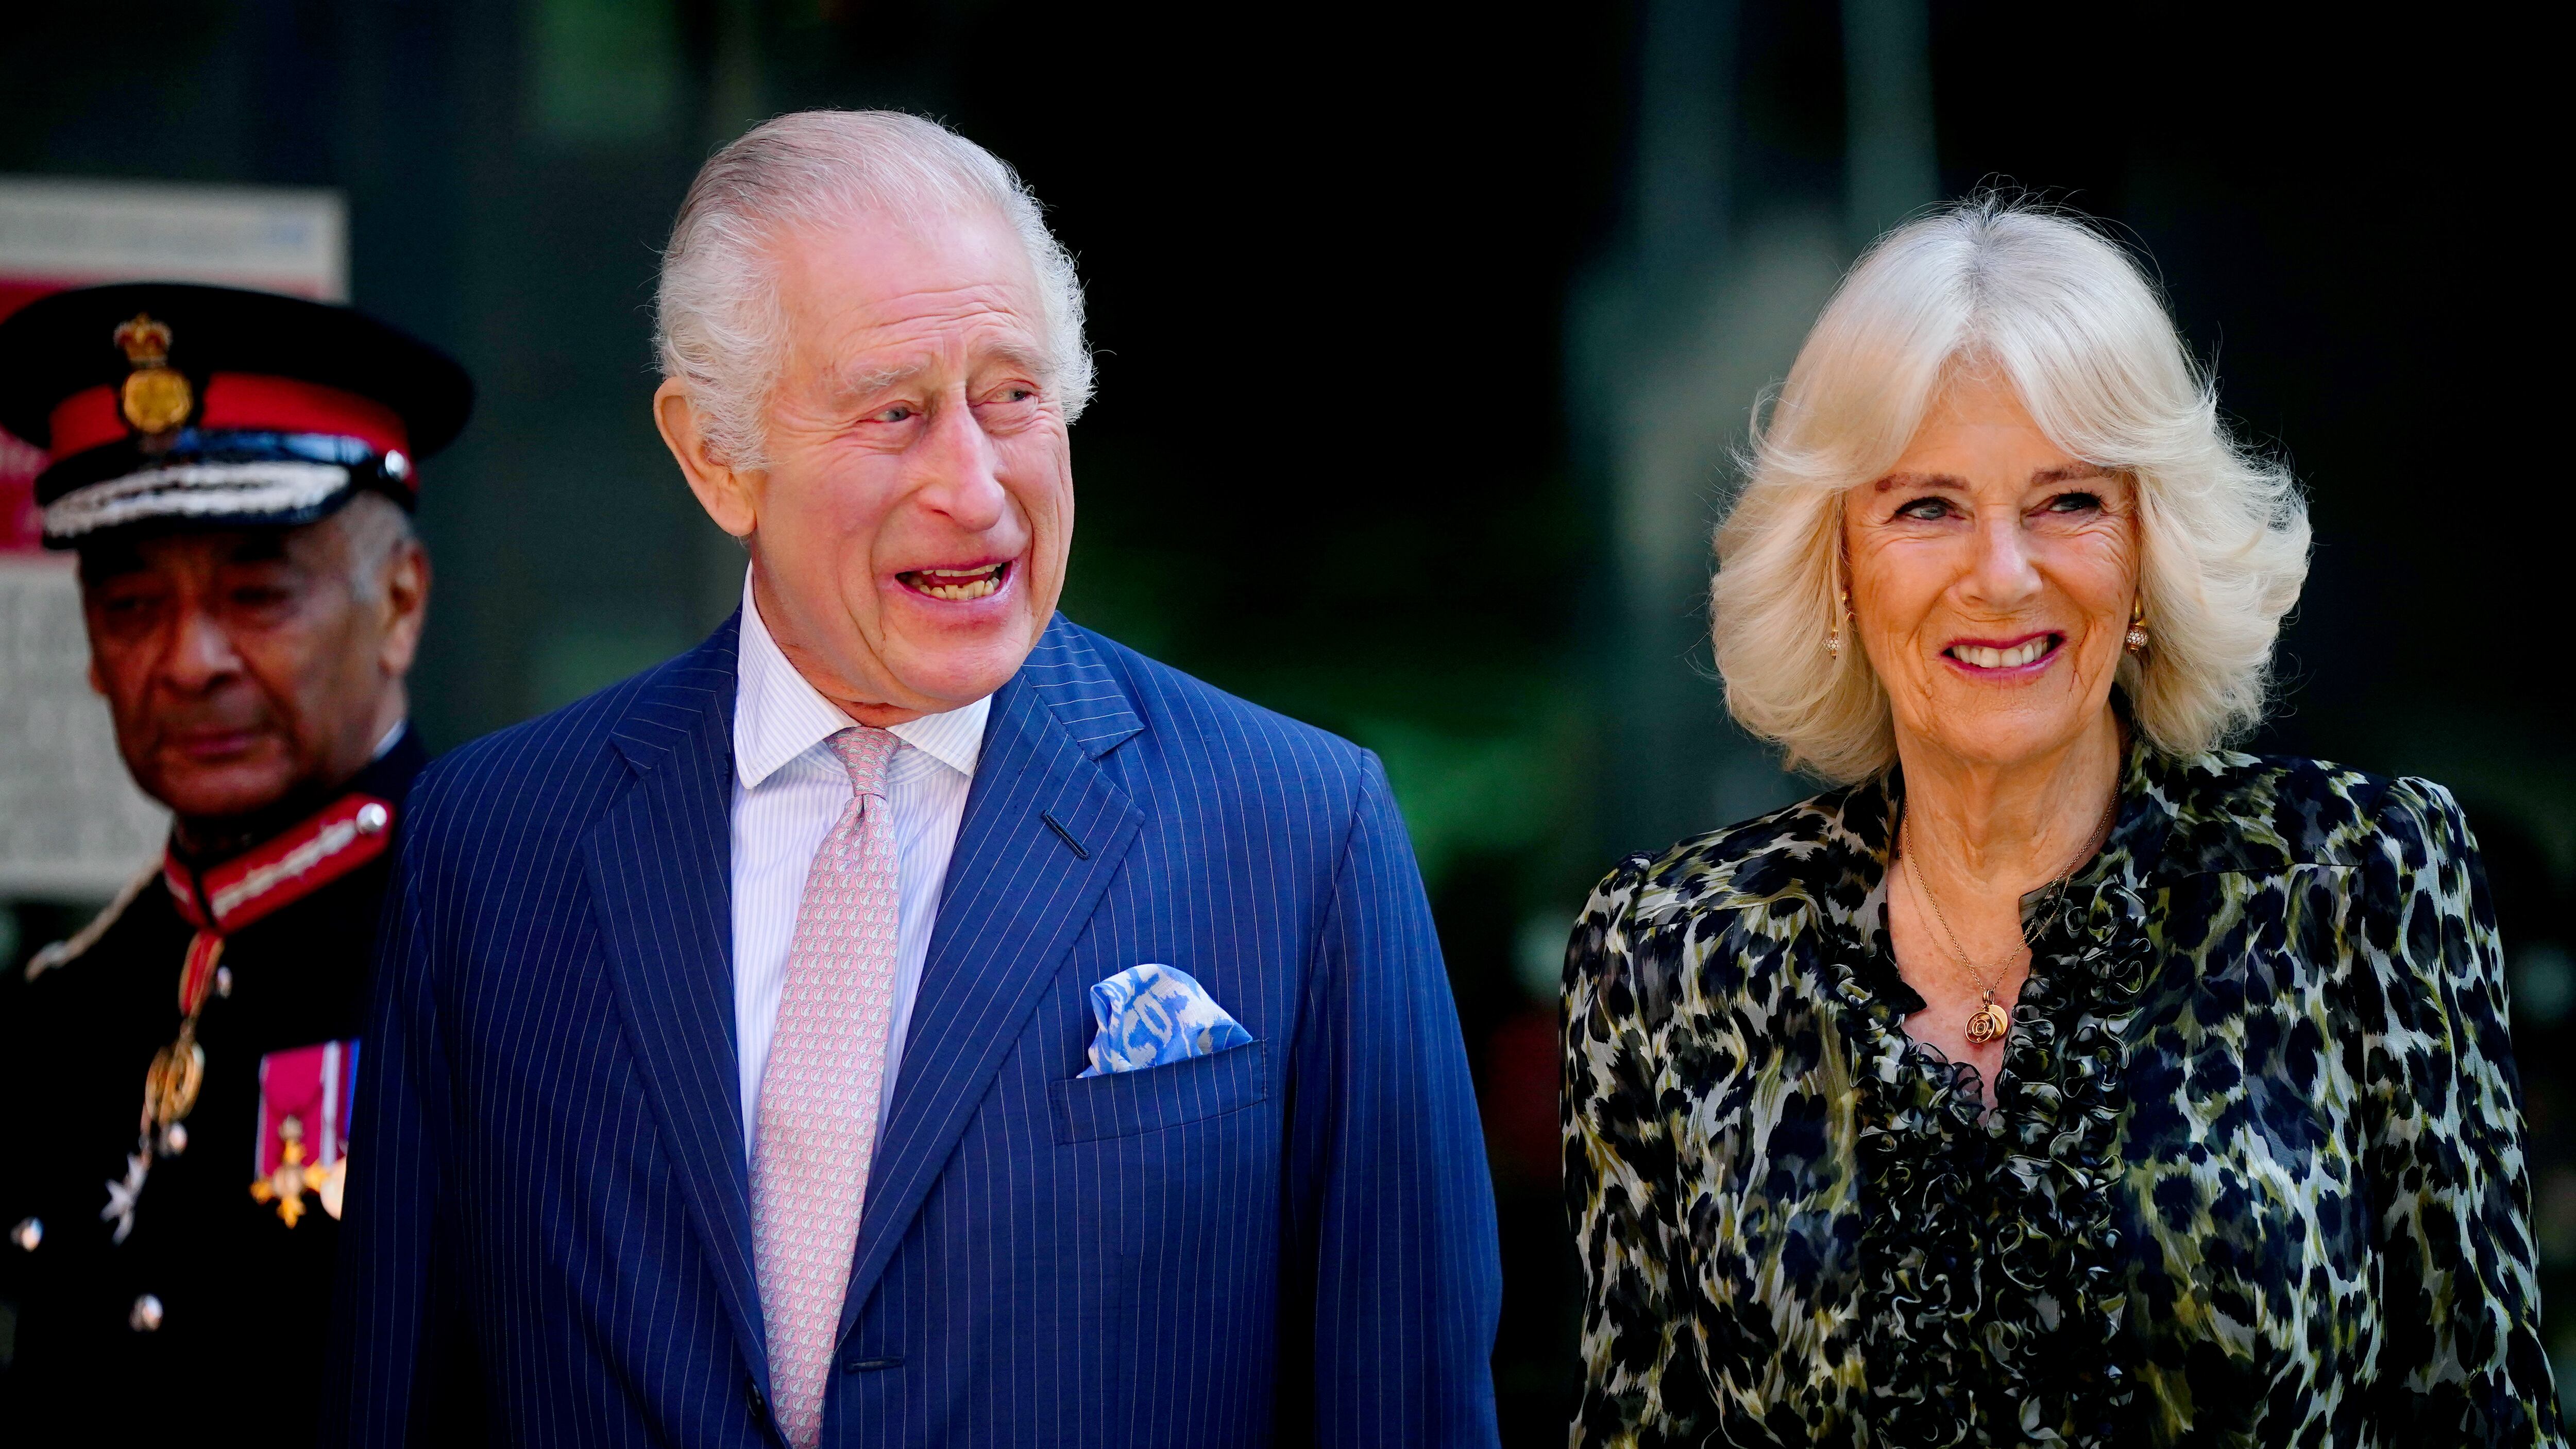 The King and Queen will visit the RHS Chelsea Flower Show next week